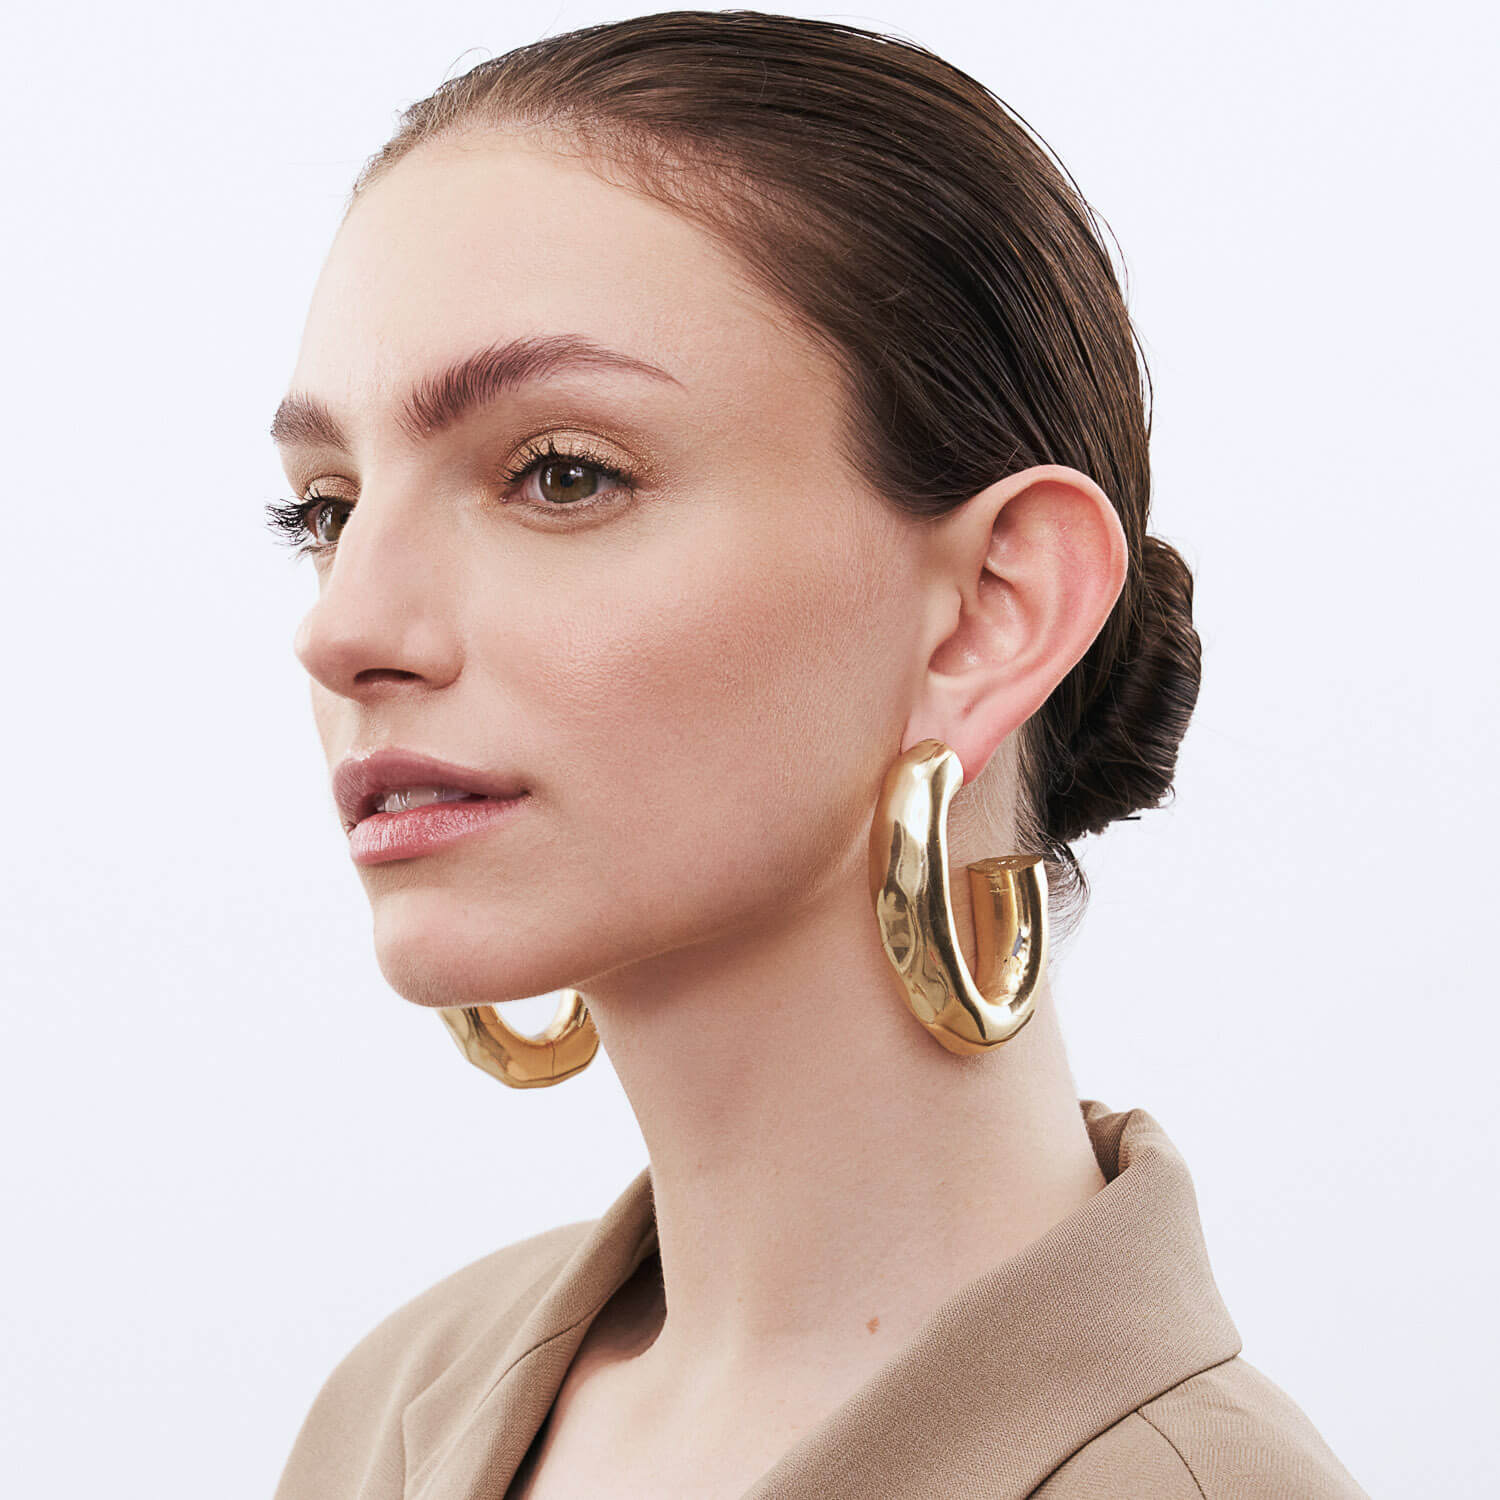 Big Hammered Earring Gold